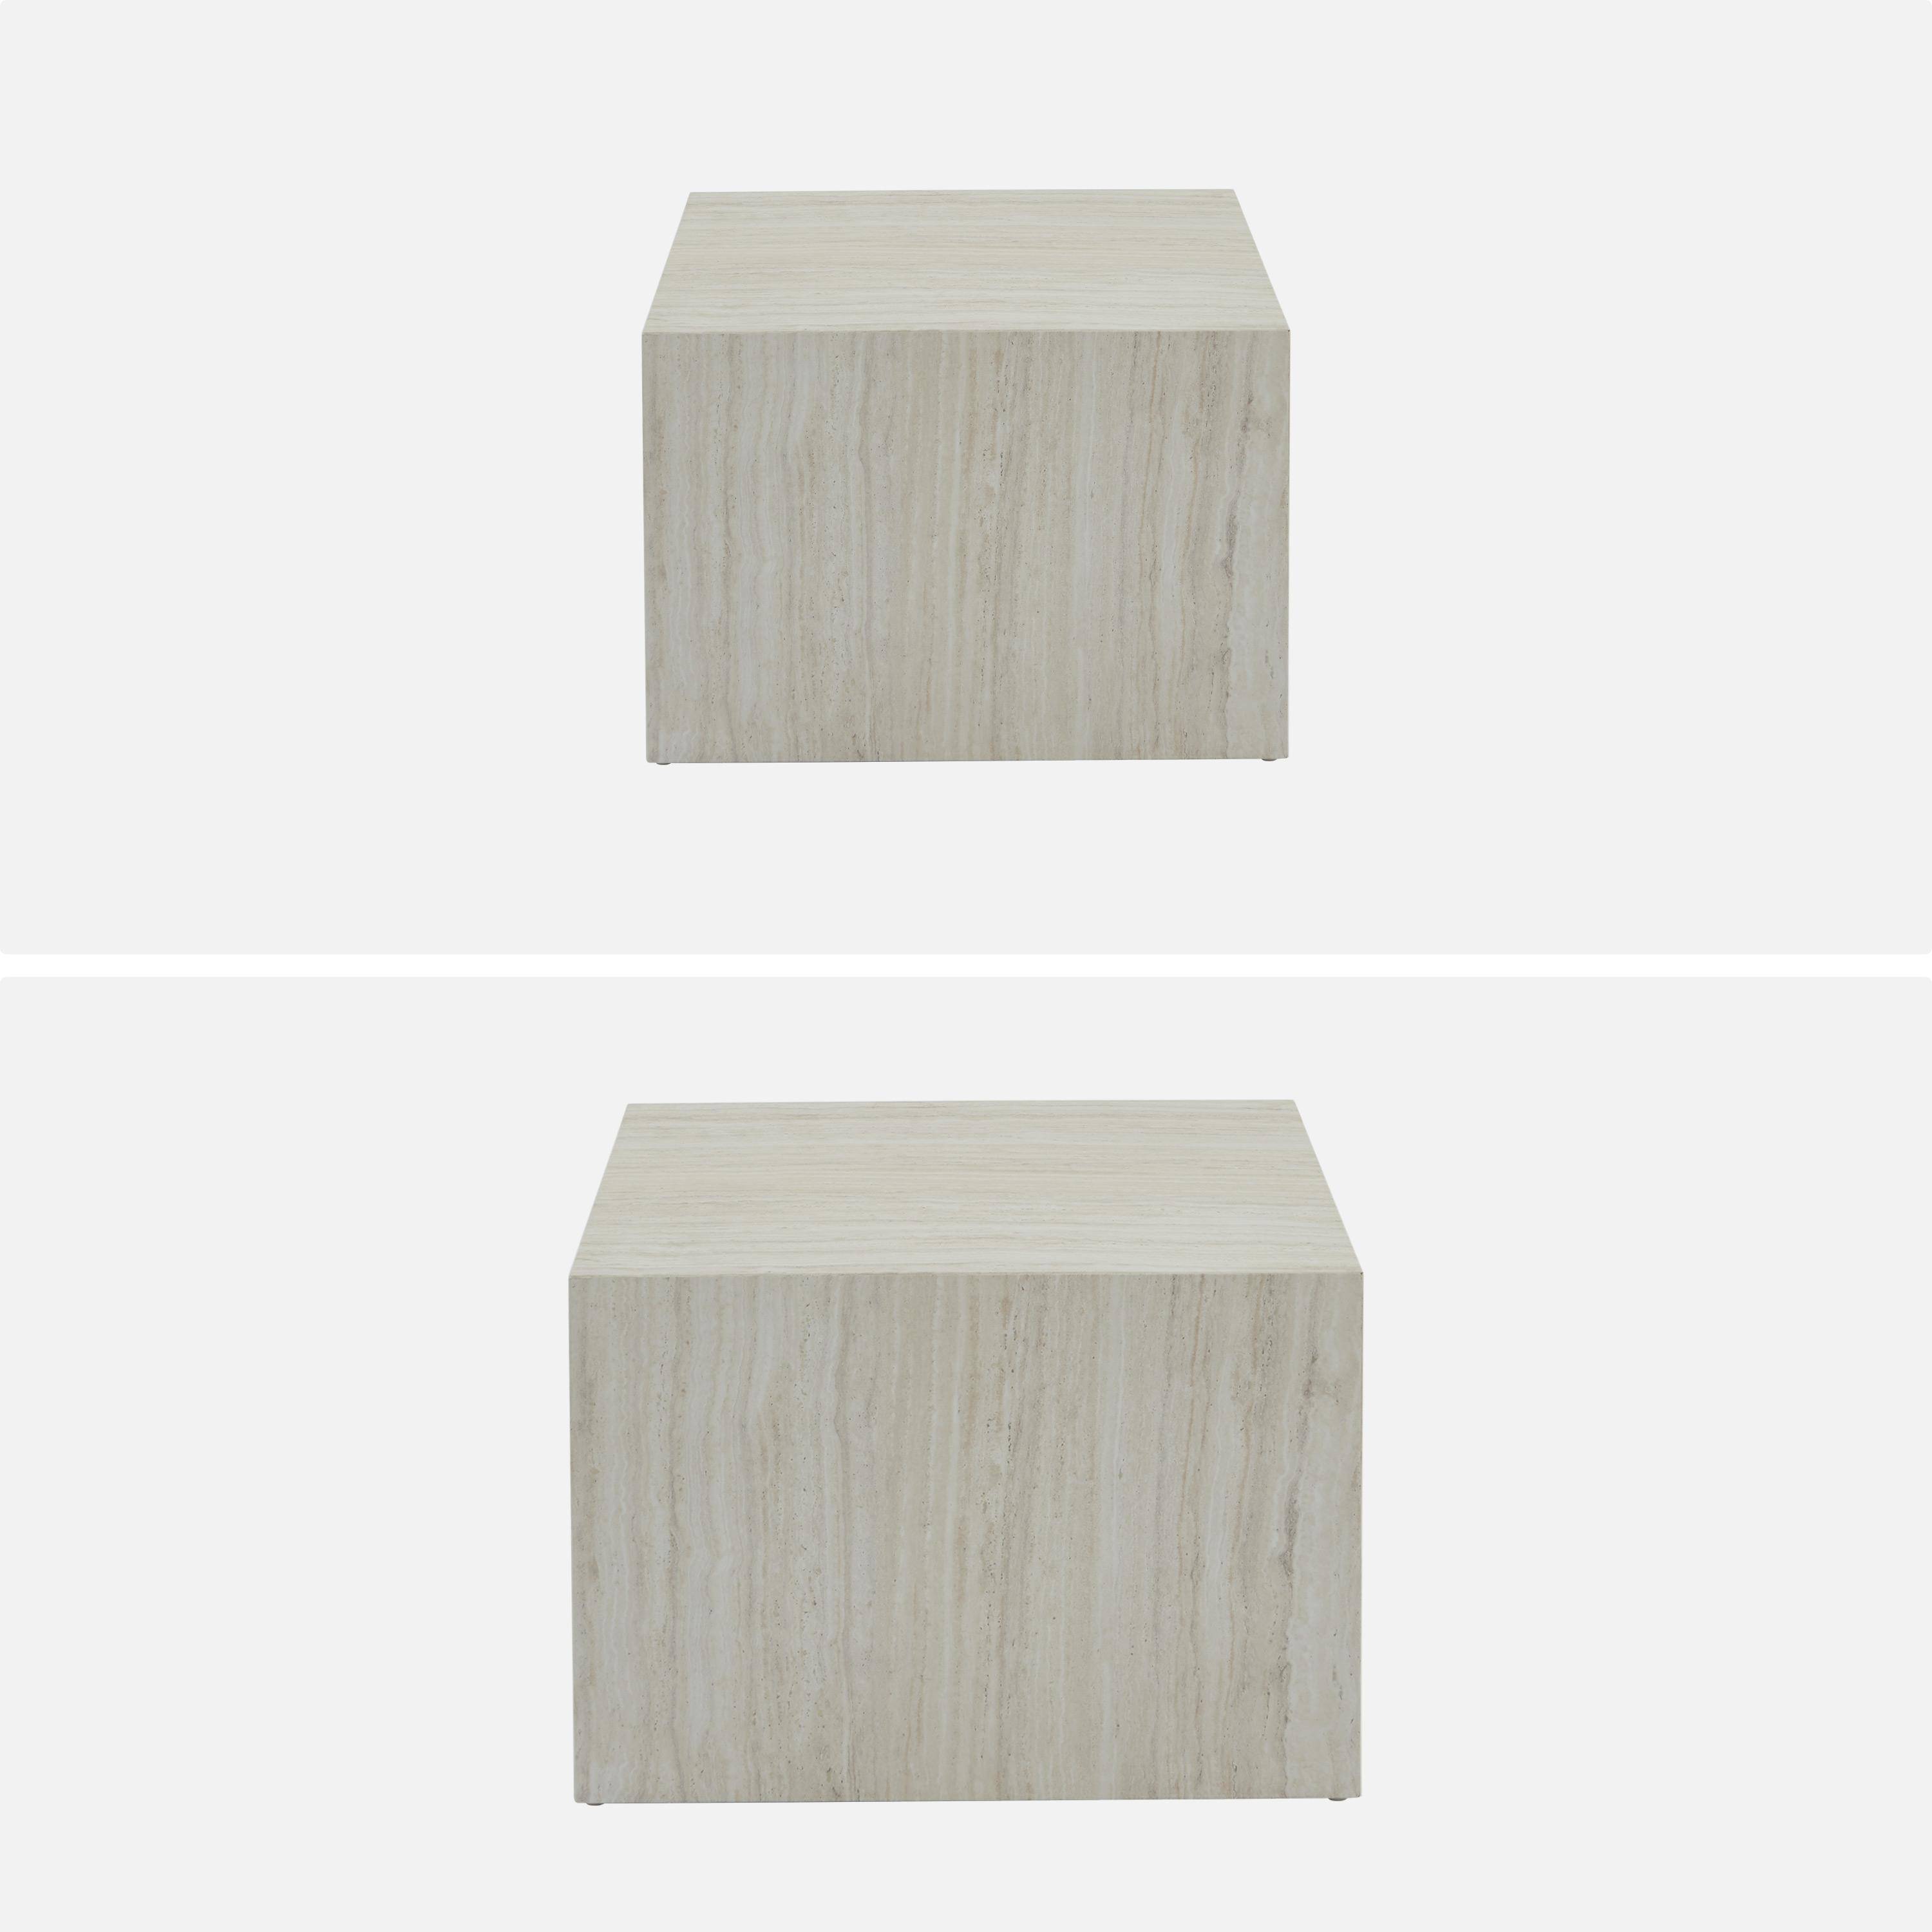 Set of 2 square coffee tables with marble effect, white, L50xW50xH33cm &  L58xW58xH40cm, Paros,sweeek,Photo6